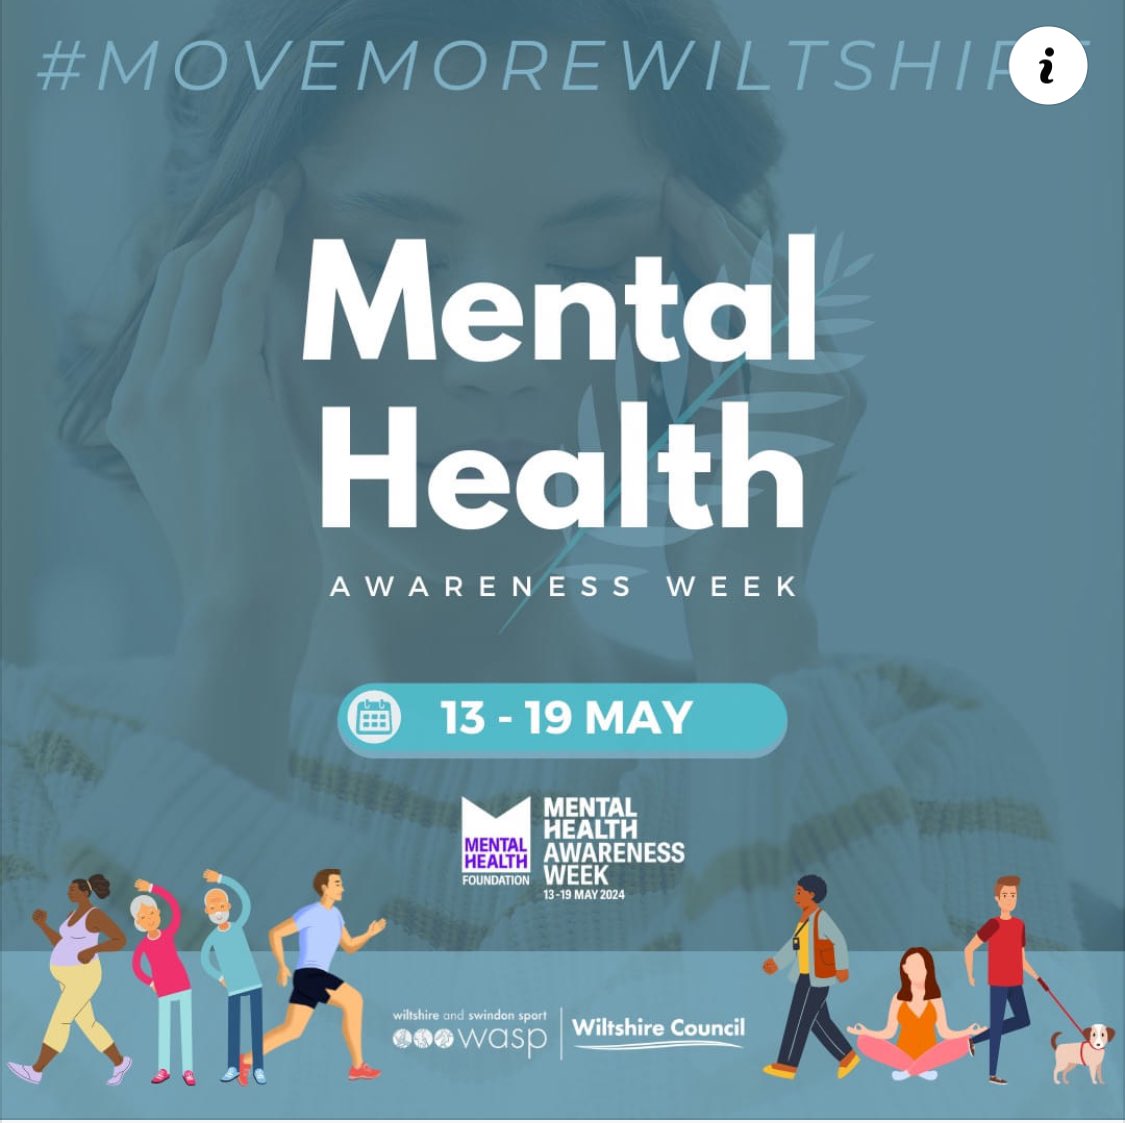 This #MentalHealthAwarenessWeek we’re encouraging people to discover ways to be more active! Complete our survey to express an interest in finding out ways to move more: surveys.wiltshire.gov.uk/Interview/438b…